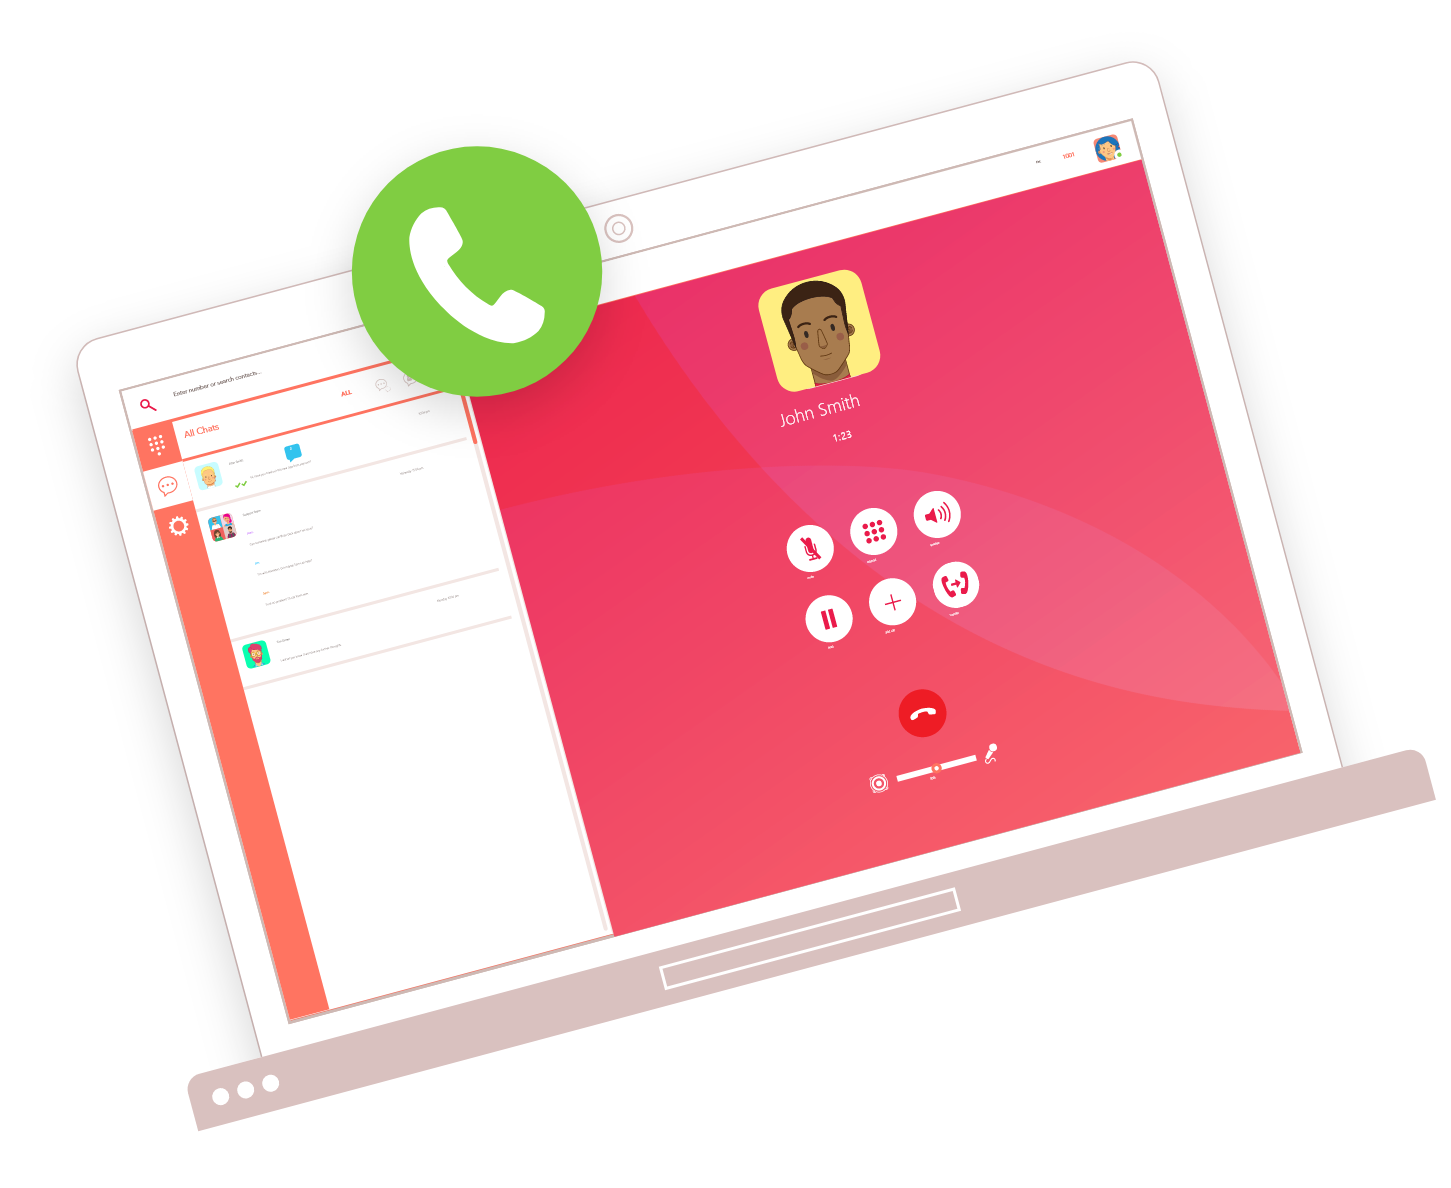 A business phone system and chat in a laptop app